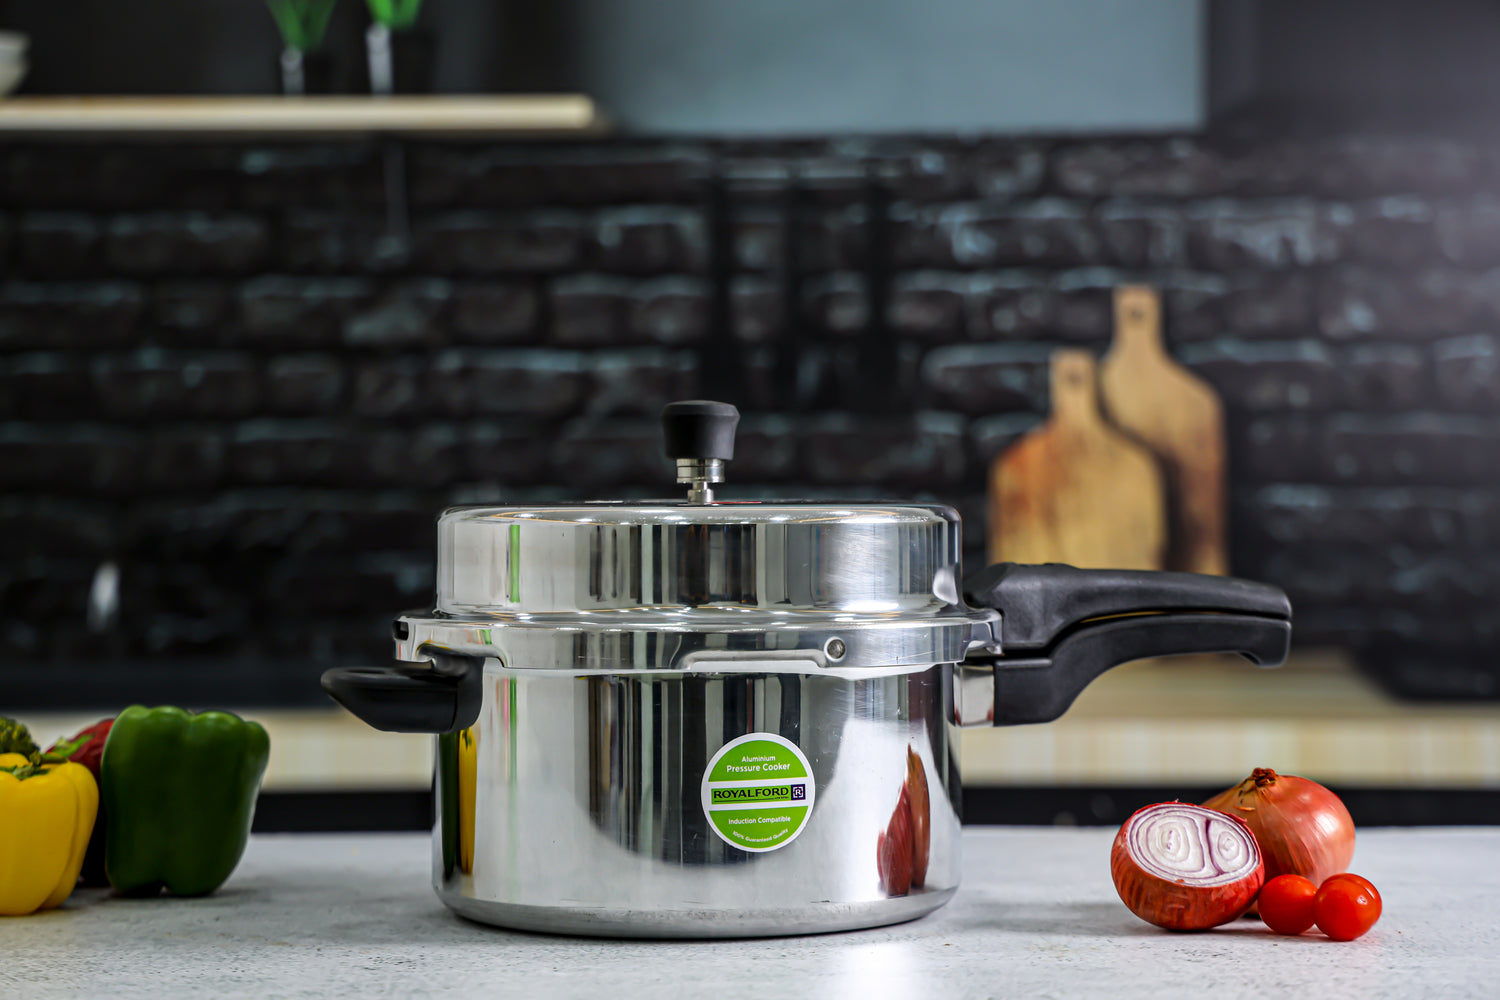 How To Use A Pressure Cooker Safely